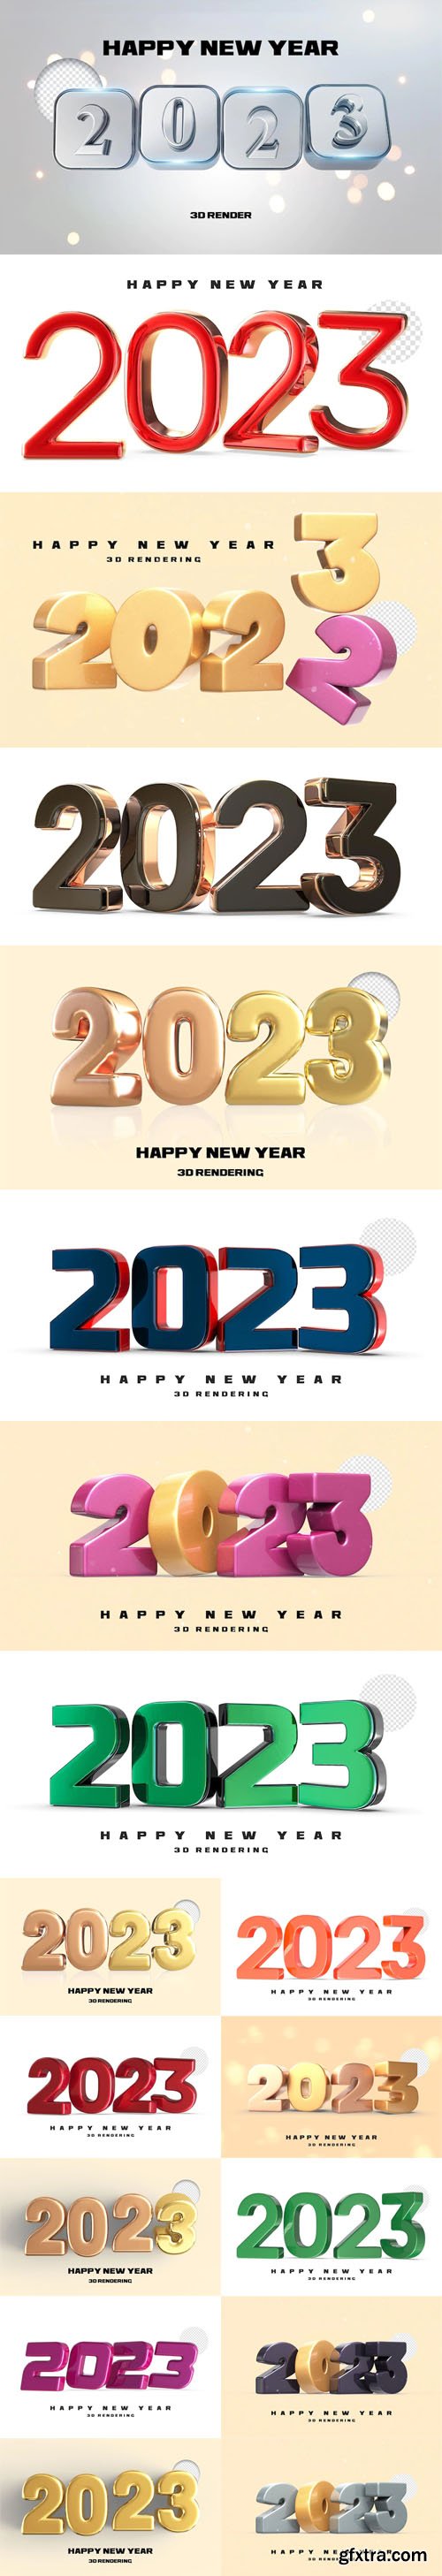 Happy New Year 2023 - 3D Rendering PSD Templates Collection